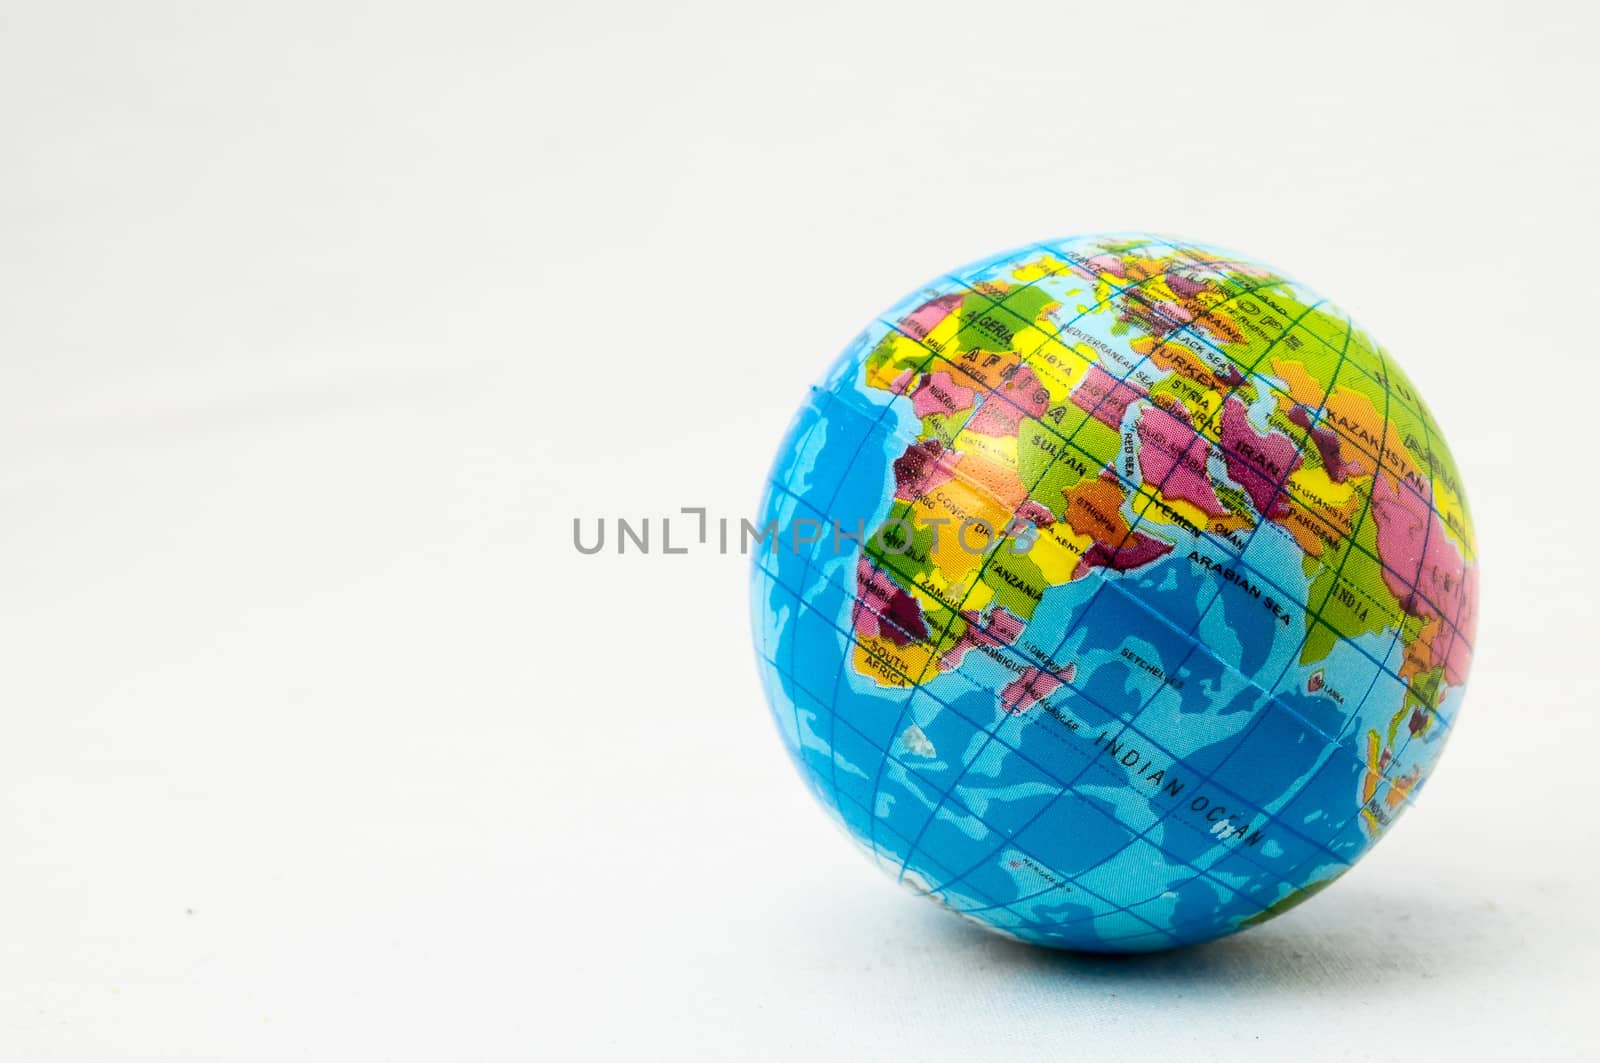 The World Globe Made of Rubber on a White Background